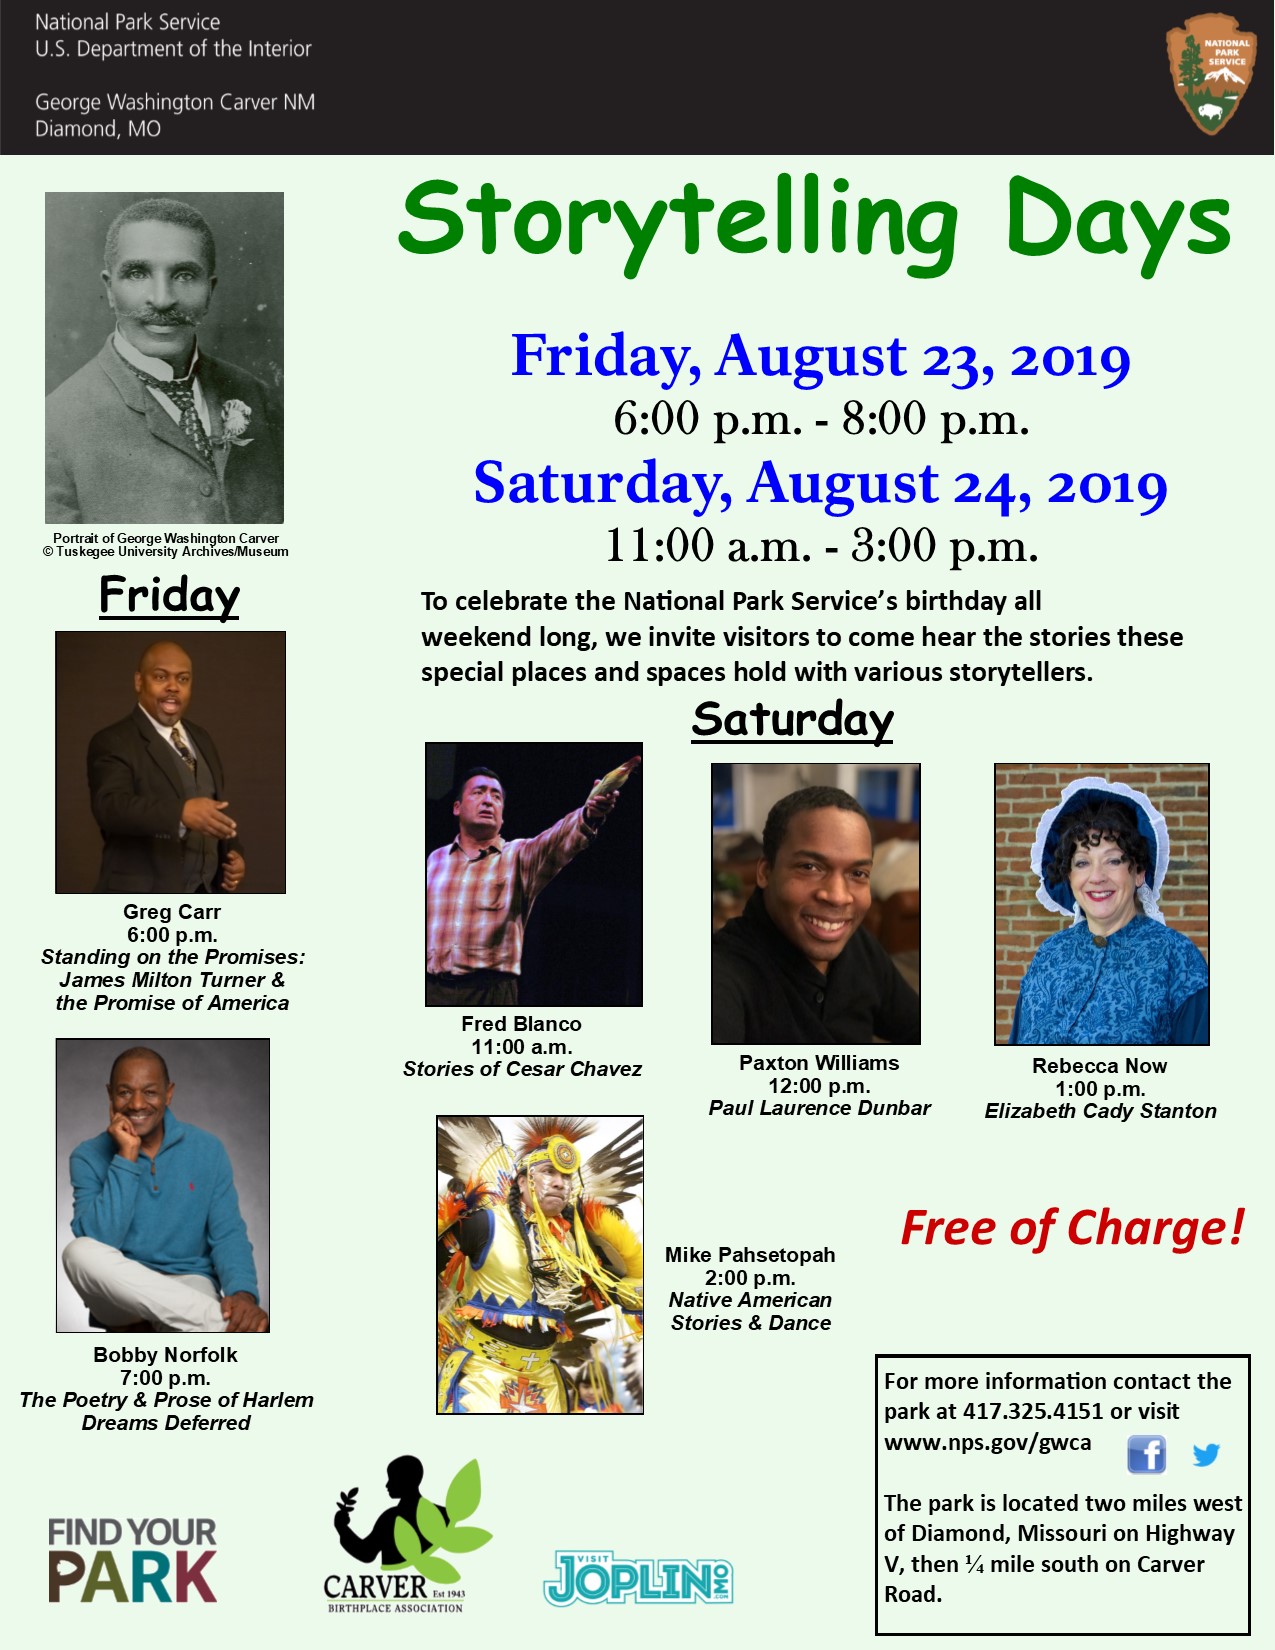 Photograph is for Storytelling Days special event. There are additional images of guest storytellers and information about the event.